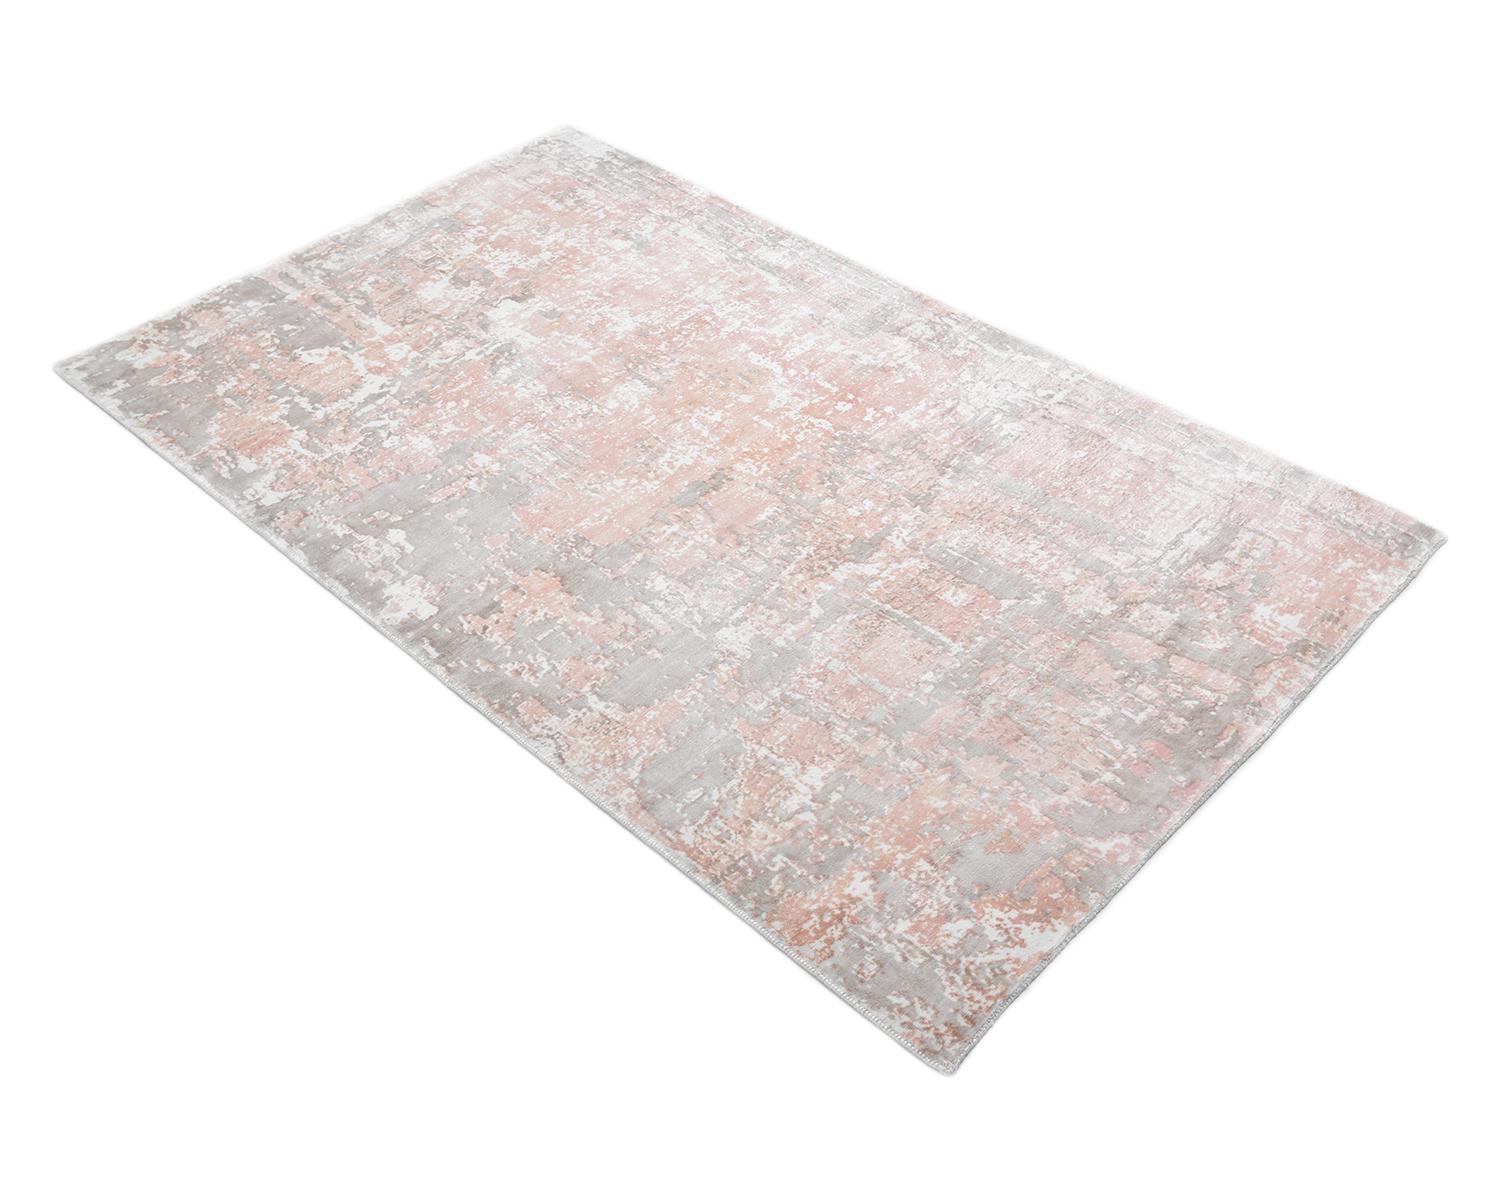 Solo Rugs Abstract Hand Loomed Pink 5 x 8 Tapis de sol en vente 1